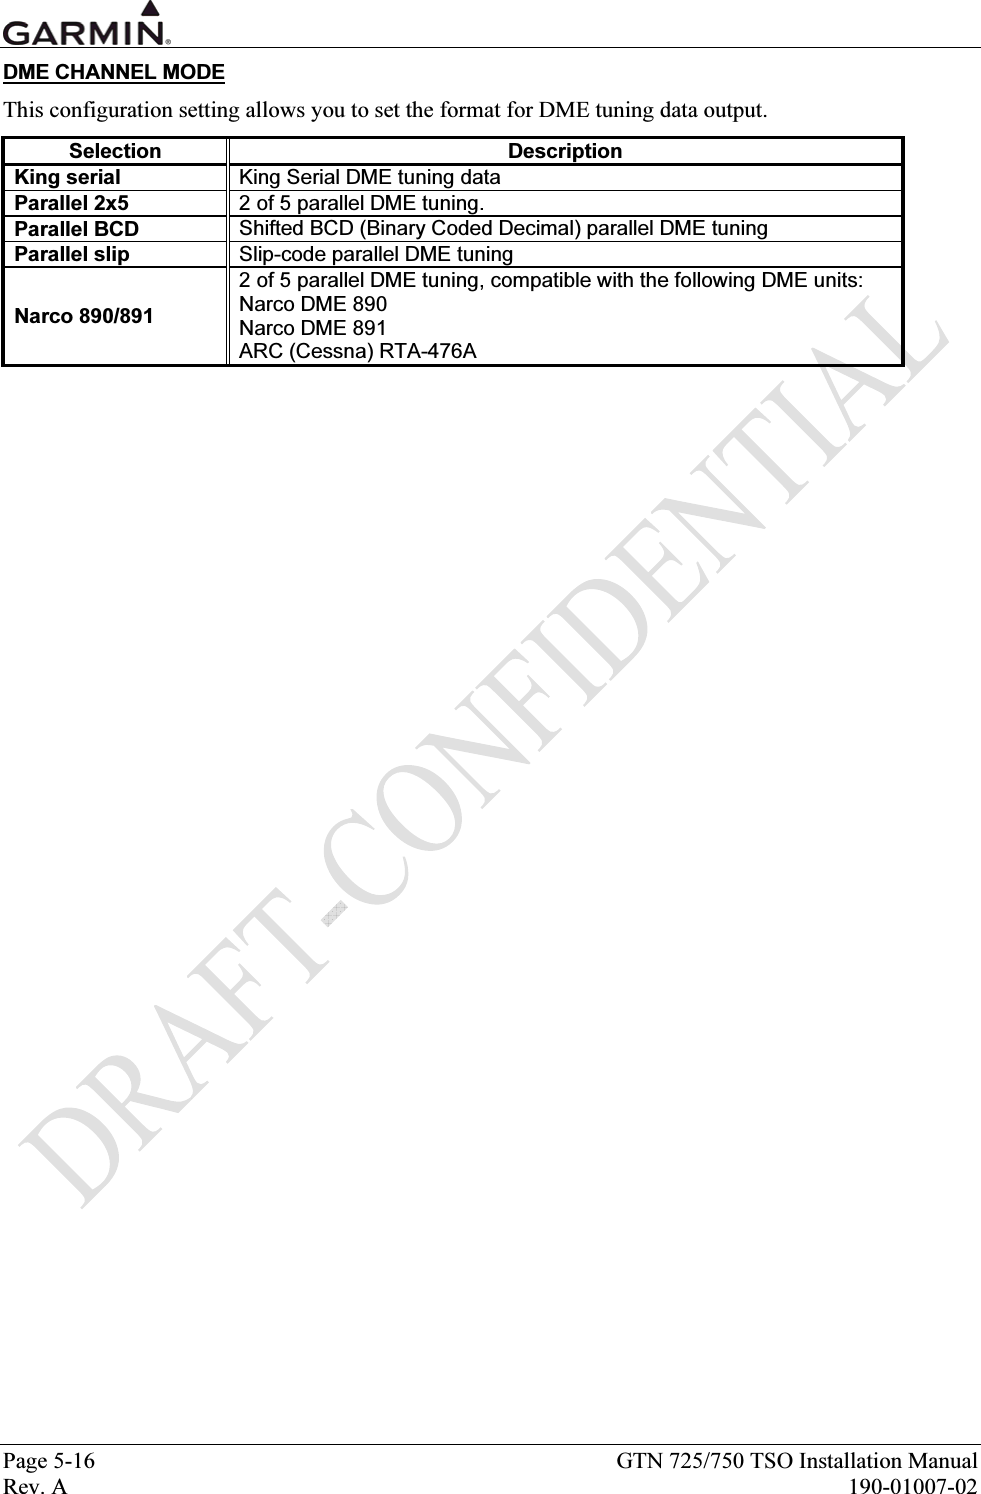  Page 5-16  GTN 725/750 TSO Installation Manual Rev. A  190-01007-02 DME CHANNEL MODE This configuration setting allows you to set the format for DME tuning data output. Selection Description King serial  King Serial DME tuning data  Parallel 2x5  2 of 5 parallel DME tuning. Parallel BCD  Shifted BCD (Binary Coded Decimal) parallel DME tuning  Parallel slip  Slip-code parallel DME tuning  Narco 890/891 2 of 5 parallel DME tuning, compatible with the following DME units: Narco DME 890 Narco DME 891 ARC (Cessna) RTA-476A  